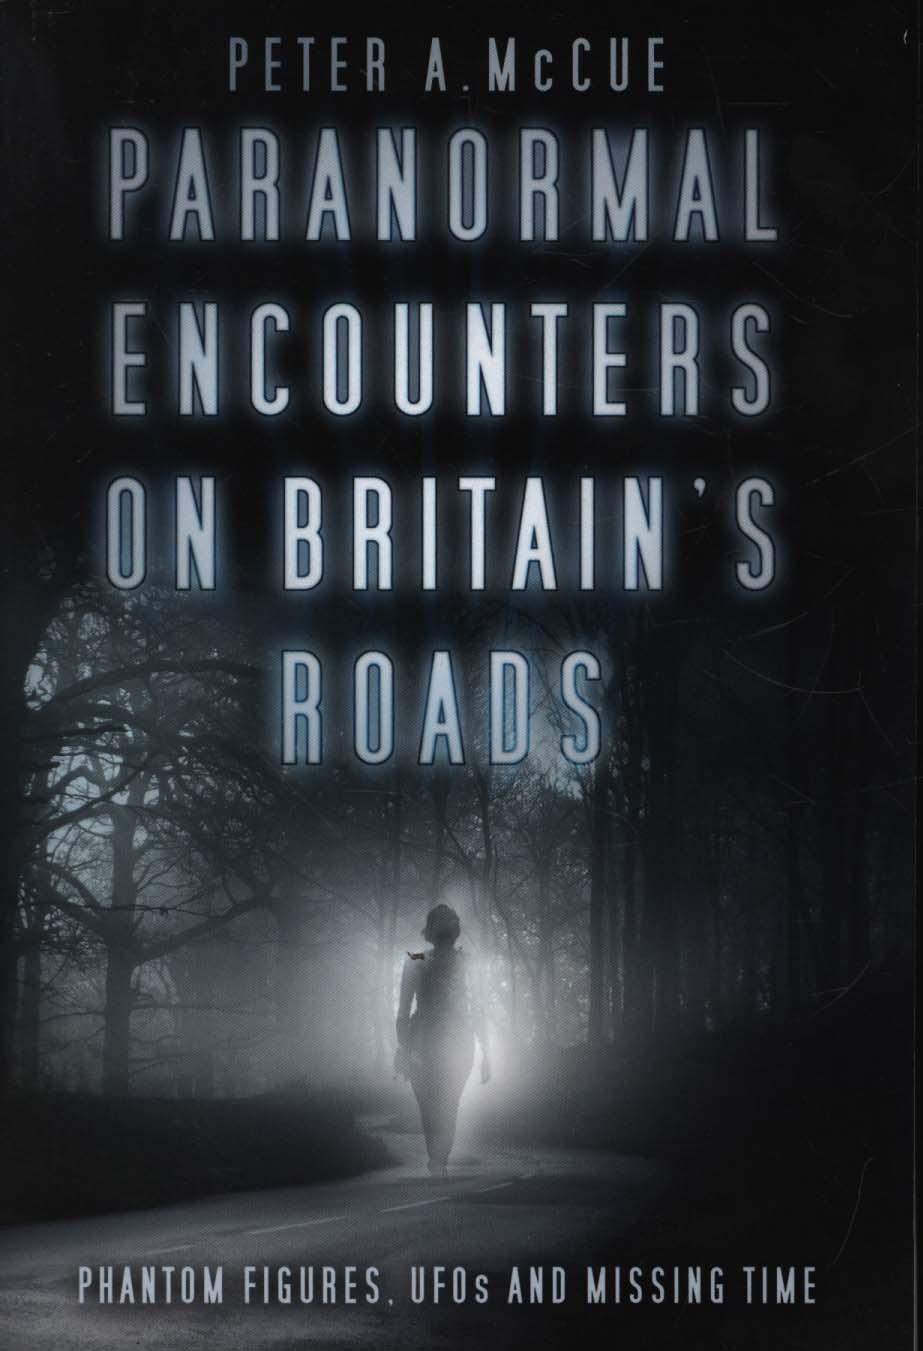 Paranormal Encounters on Britain's Roads